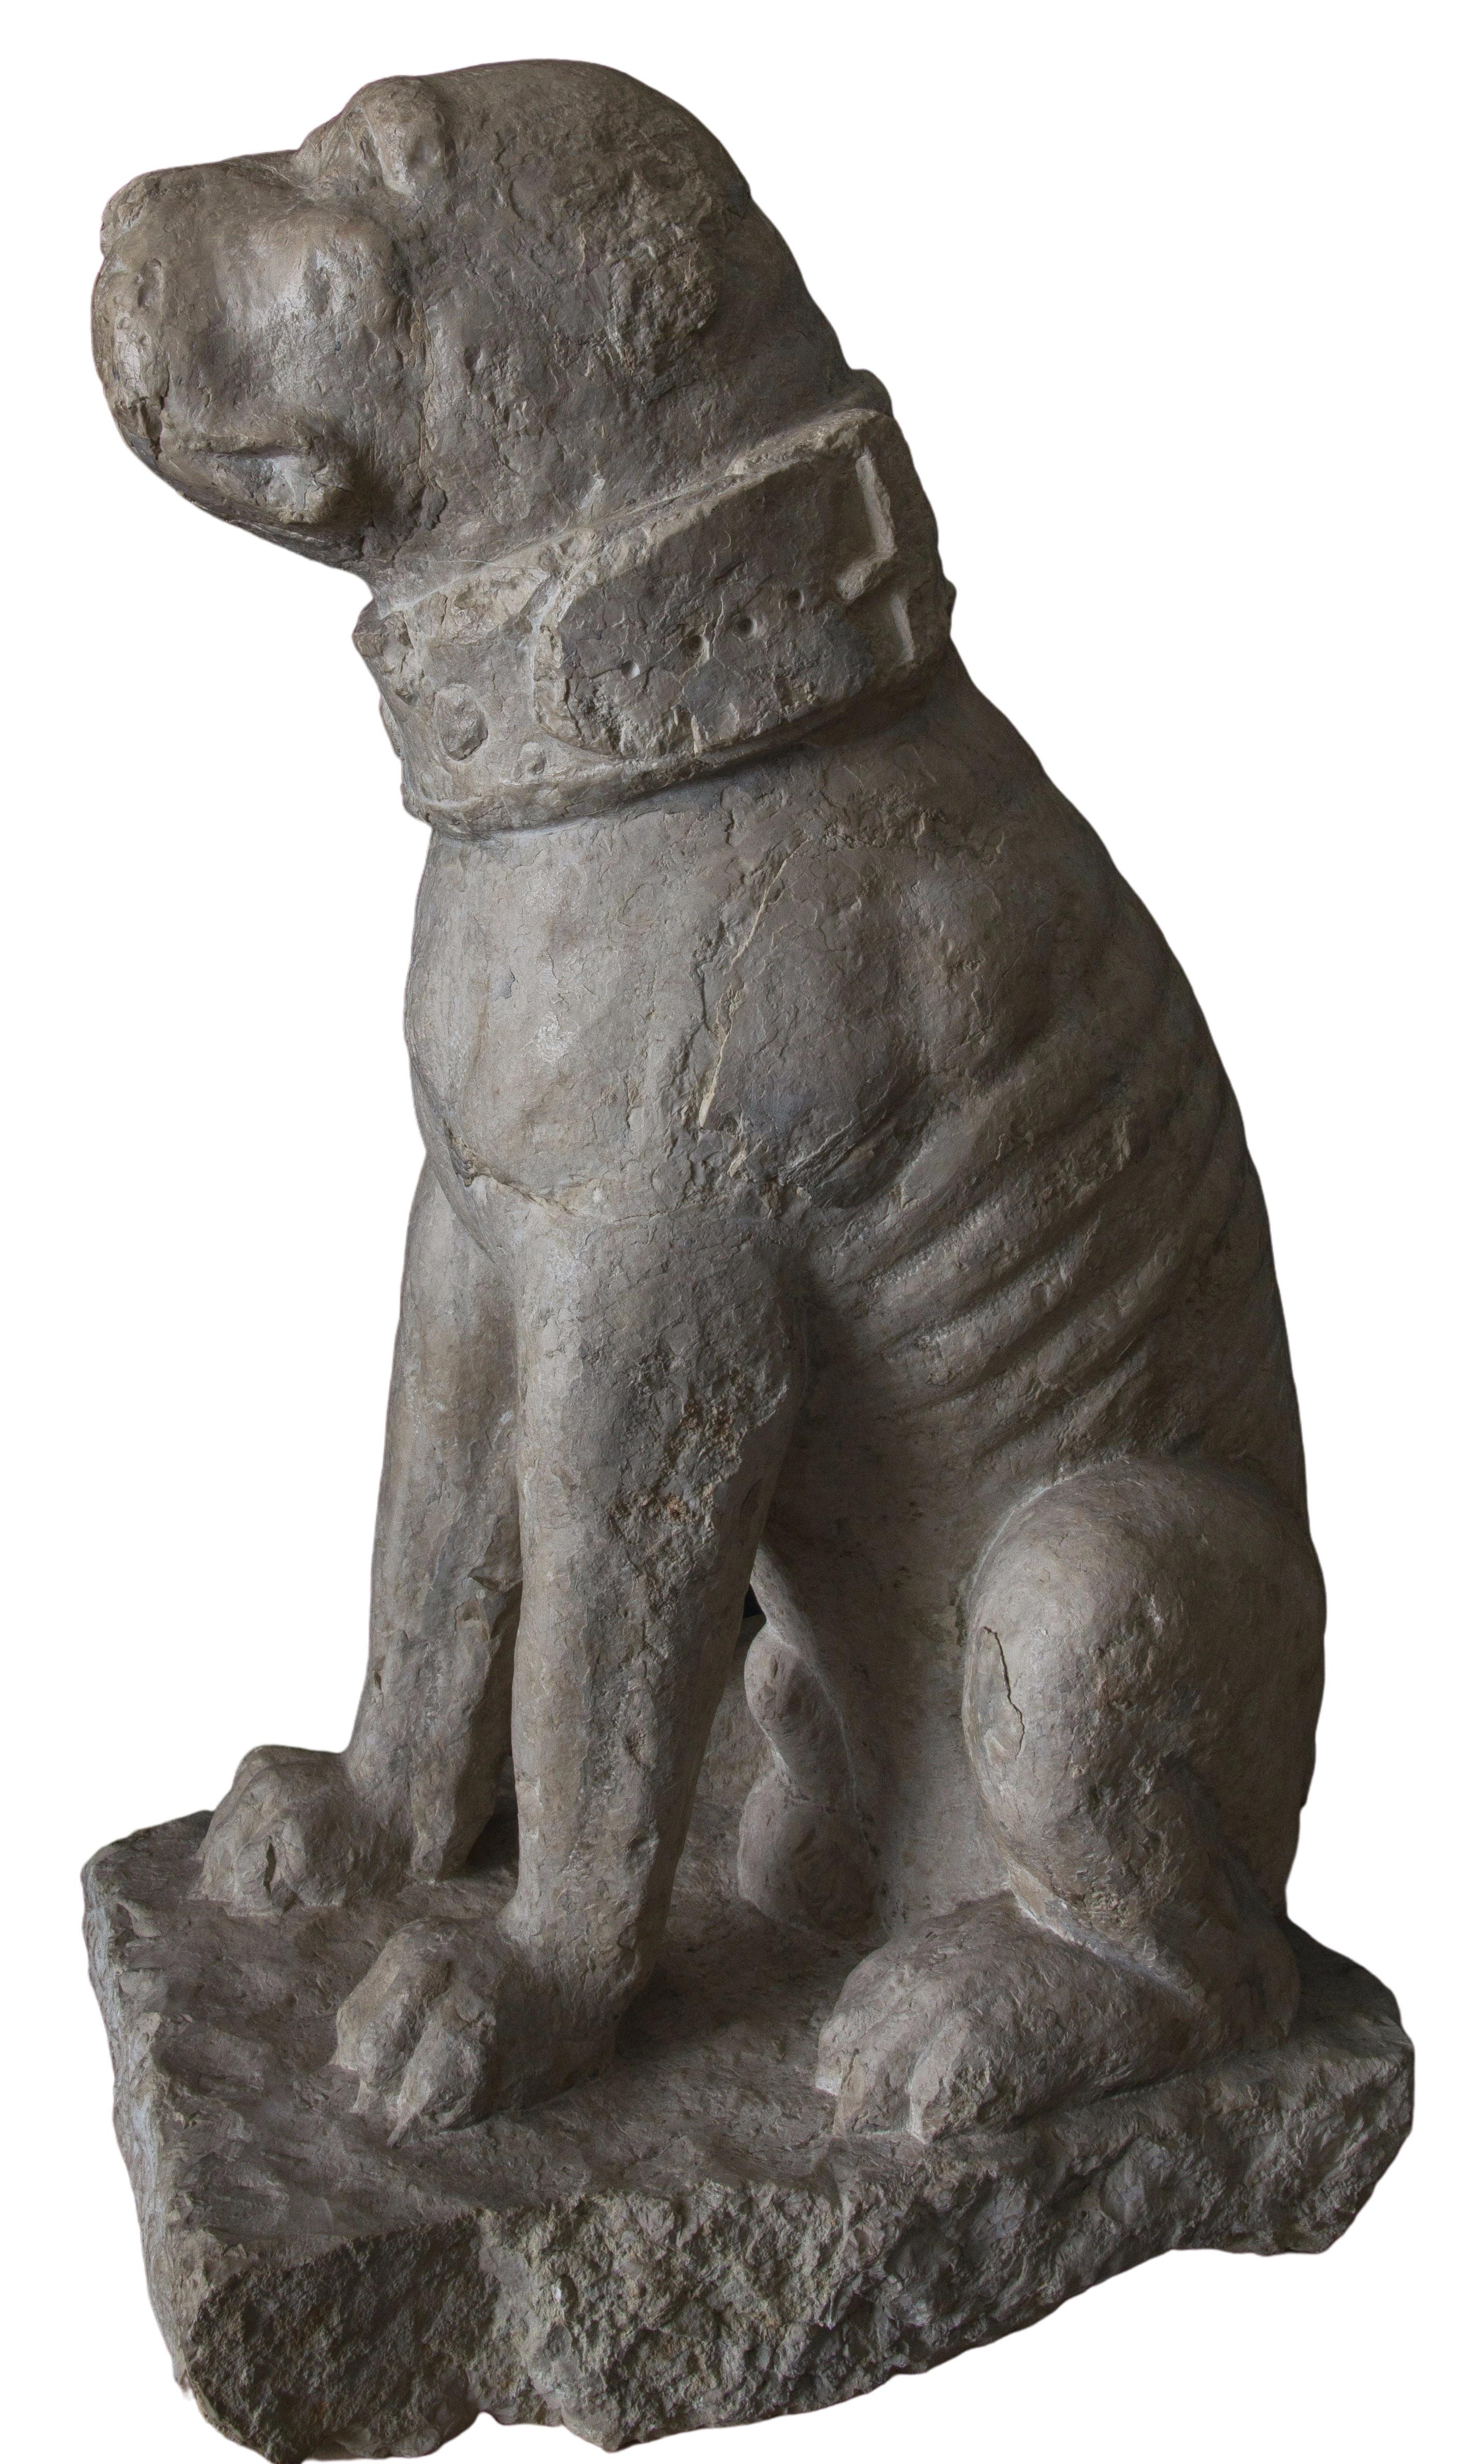 Rare pair of sitting Mastiffs dogs.
Venice, end of 15th century - first half of the 16th century.
Istrian stone.

Provenance: 
- Important private collection of an architect and scenographer from Orvieto (Umbria)

A regular exportation